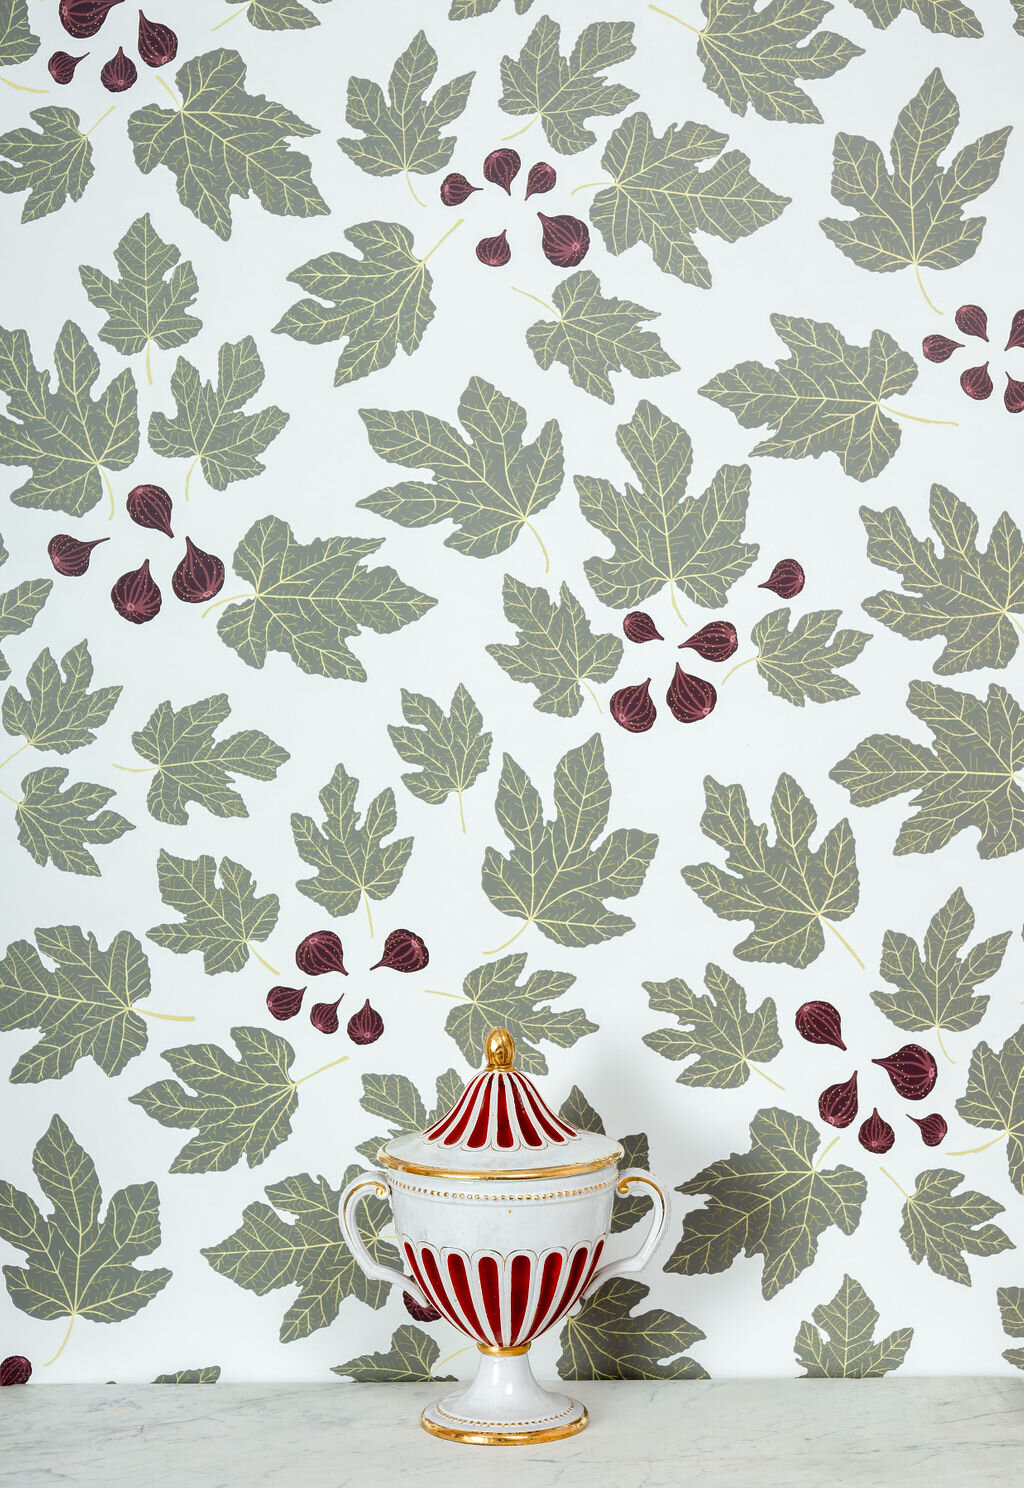 Kate Golding Figs wallpaper // Modern wallcoverings and interior decor.